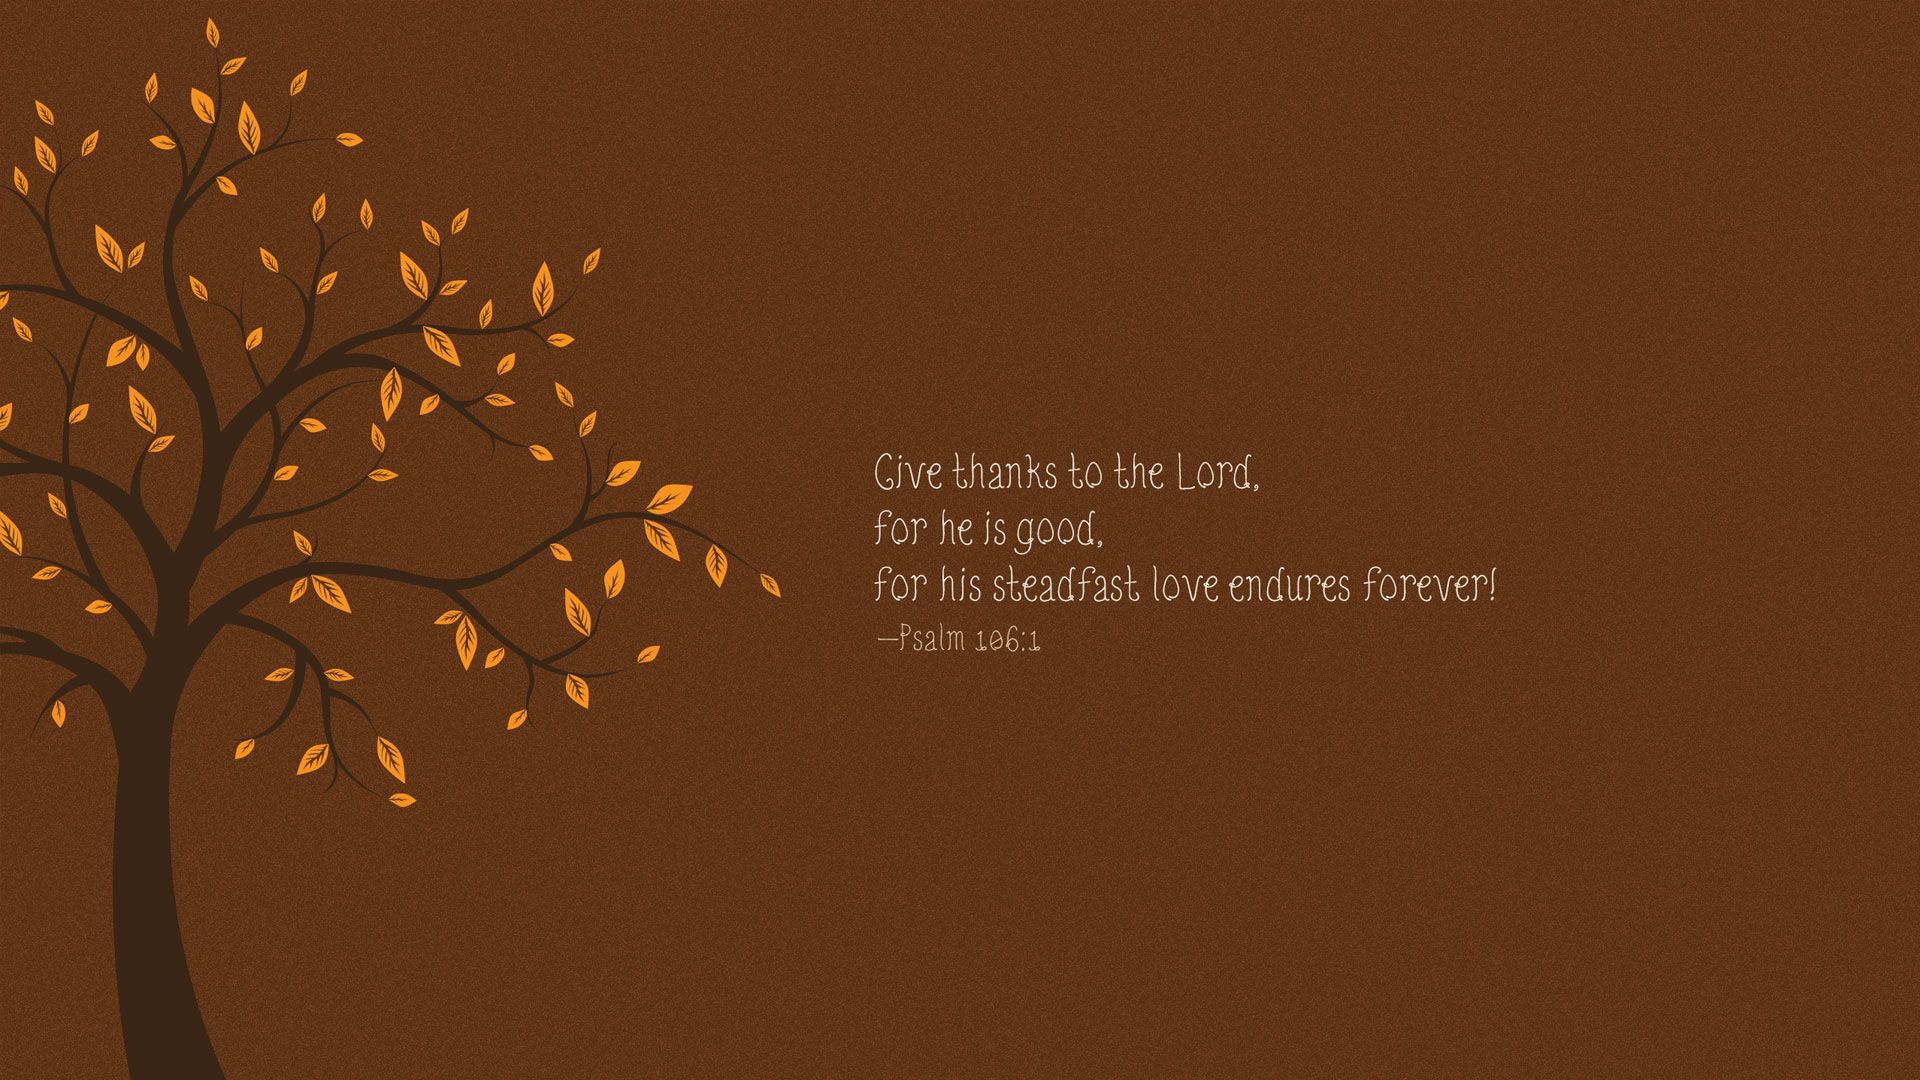 Give Thanks to the Lord Wallpaper. Give Thanks Wallpaper, Never Give in Wallpaper and Never Give Up Wallpaper